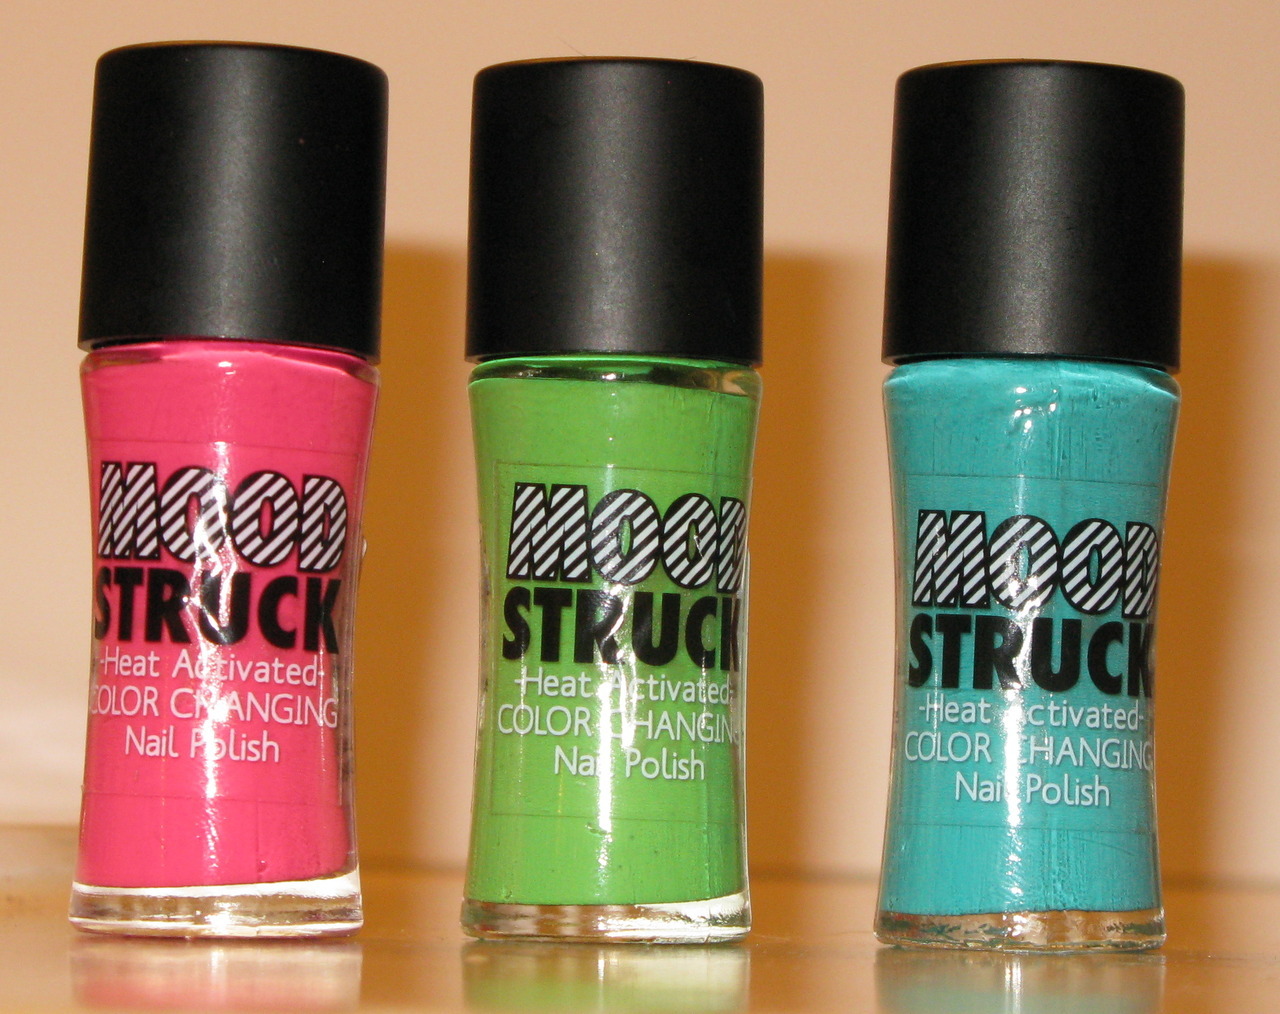 5. Heat-Activated Nail Polish - wide 4